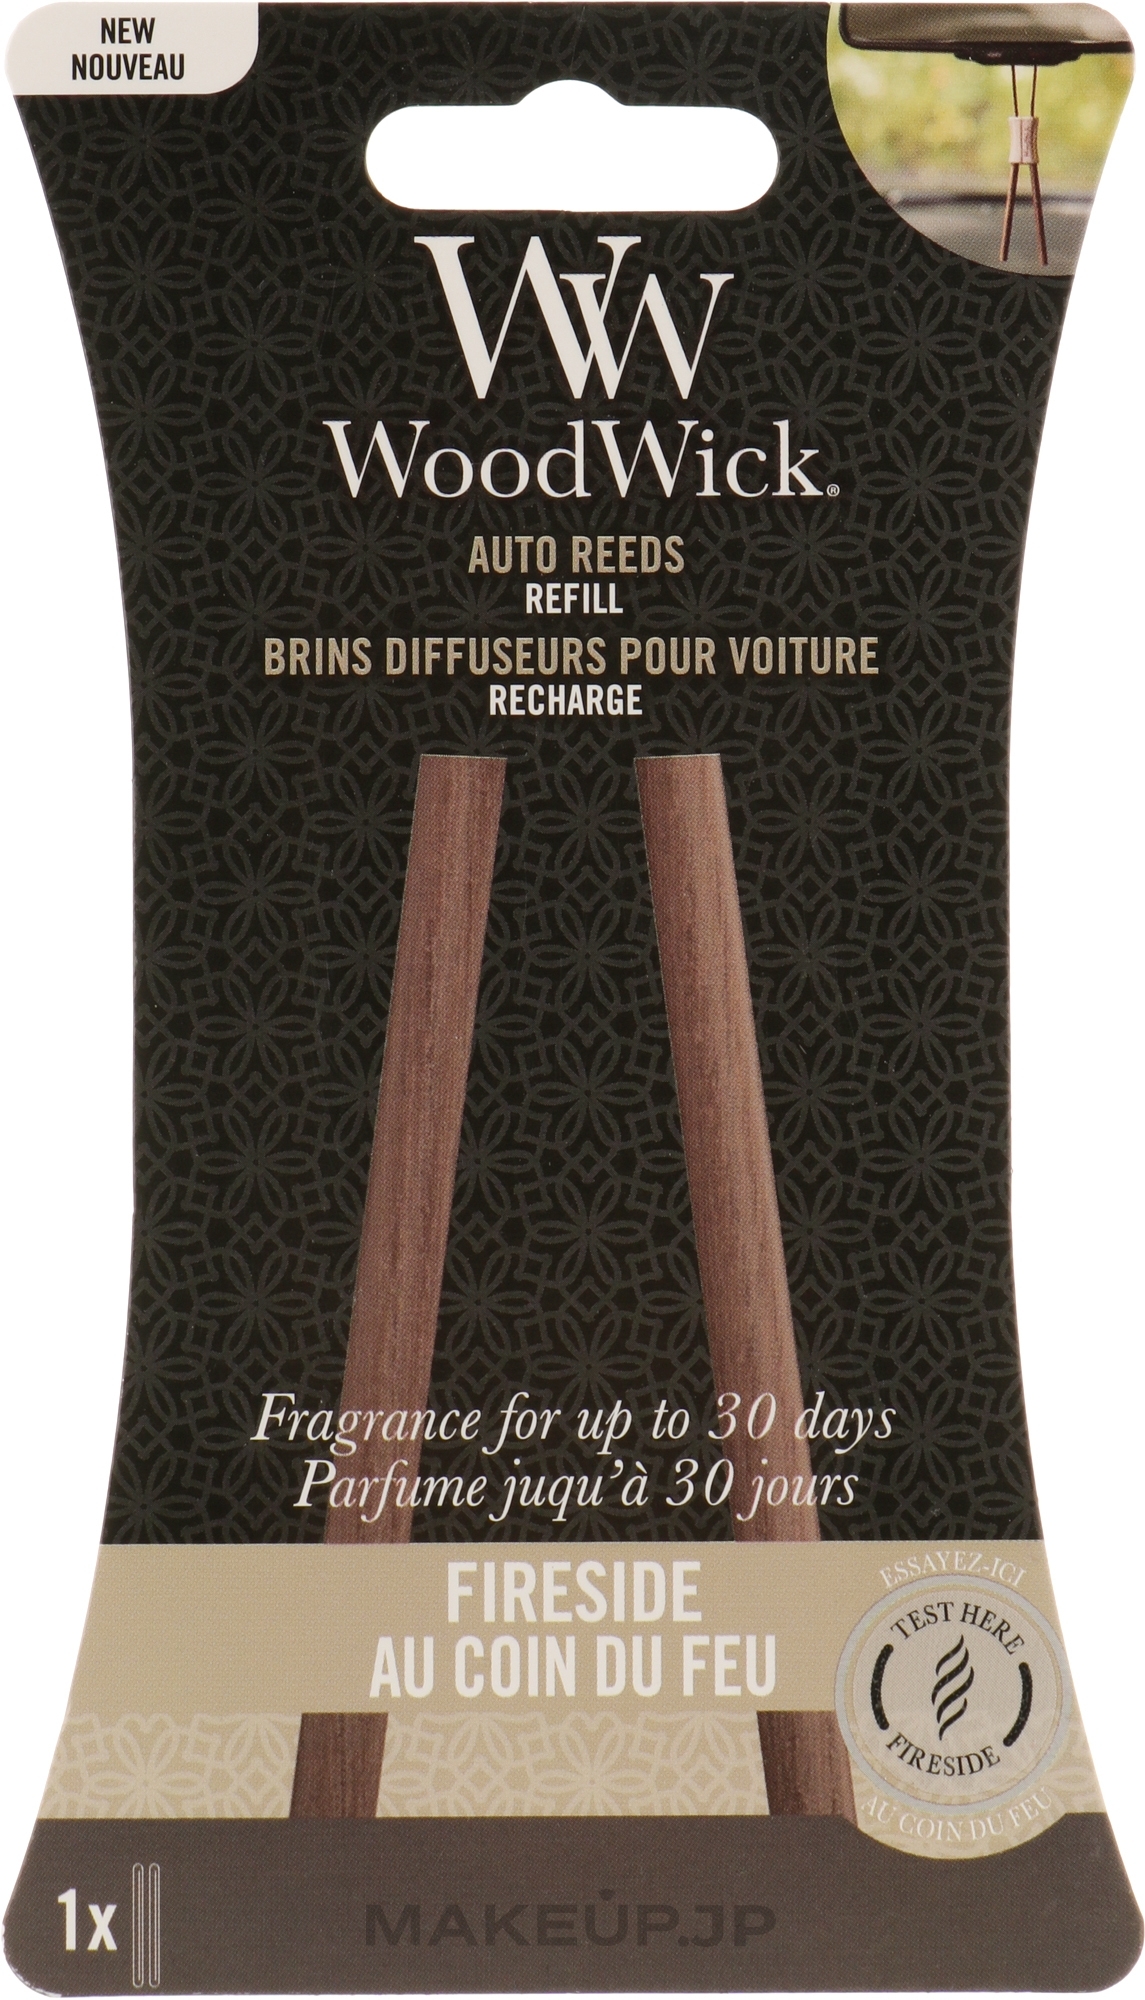 Car Reed Diffuser (refill) - Woodwick Fireside Auto Reeds Refill — photo 20 g